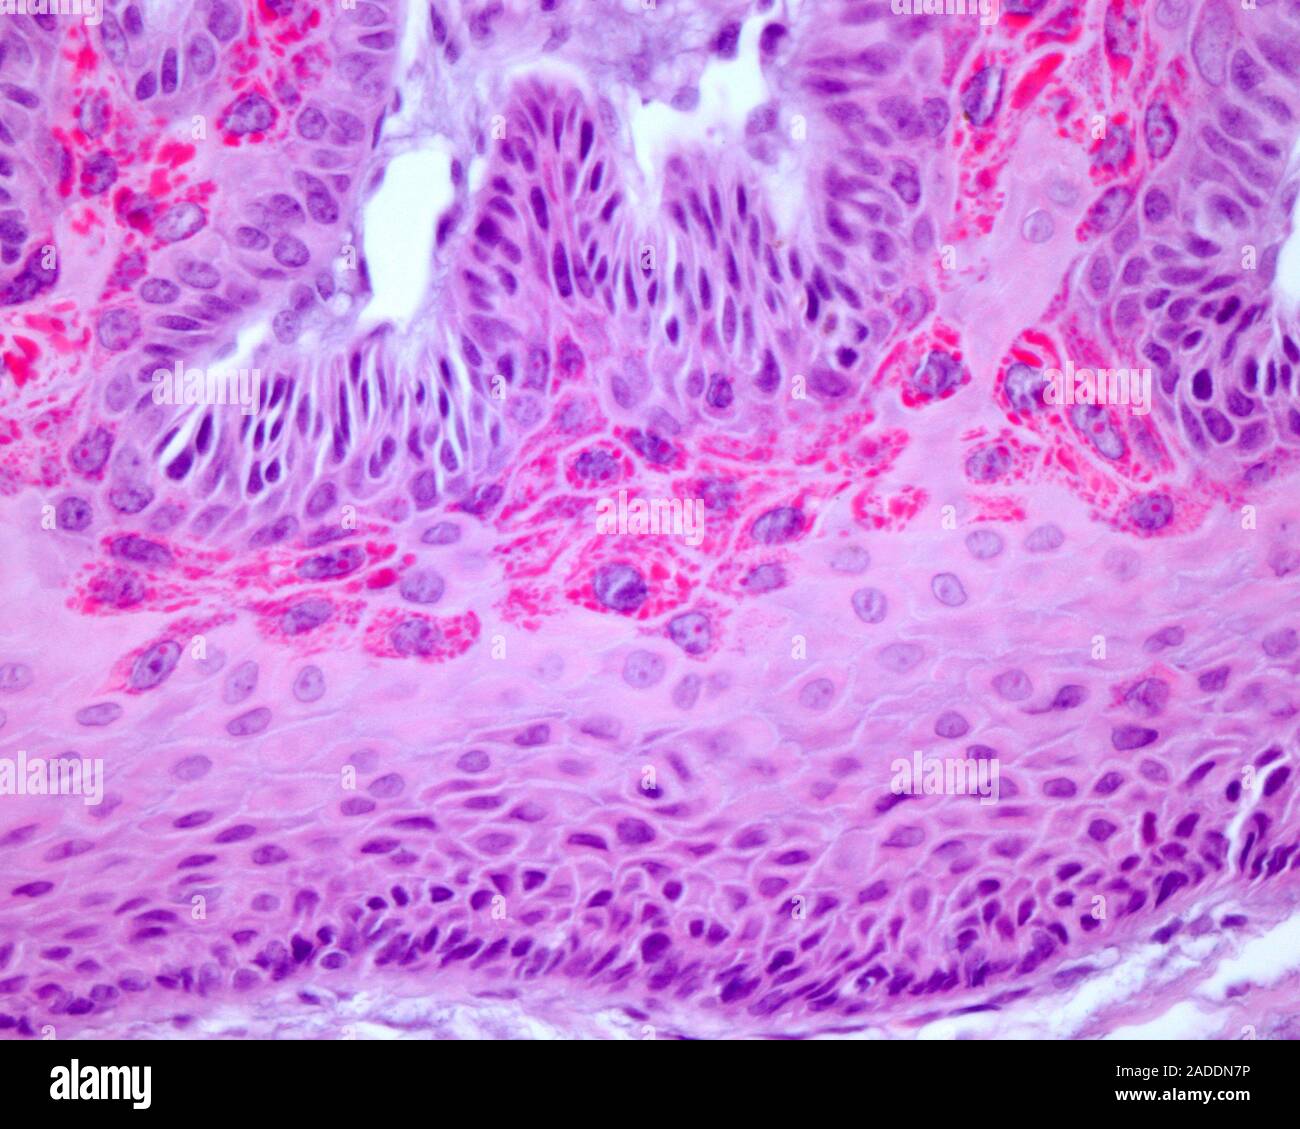 Molluscum contagiosum, light micrograph. Molluscum contagiosum is a skin viral infection characterized by eosinophilic inclusion bodies (Henderson-Pat Stock Photo